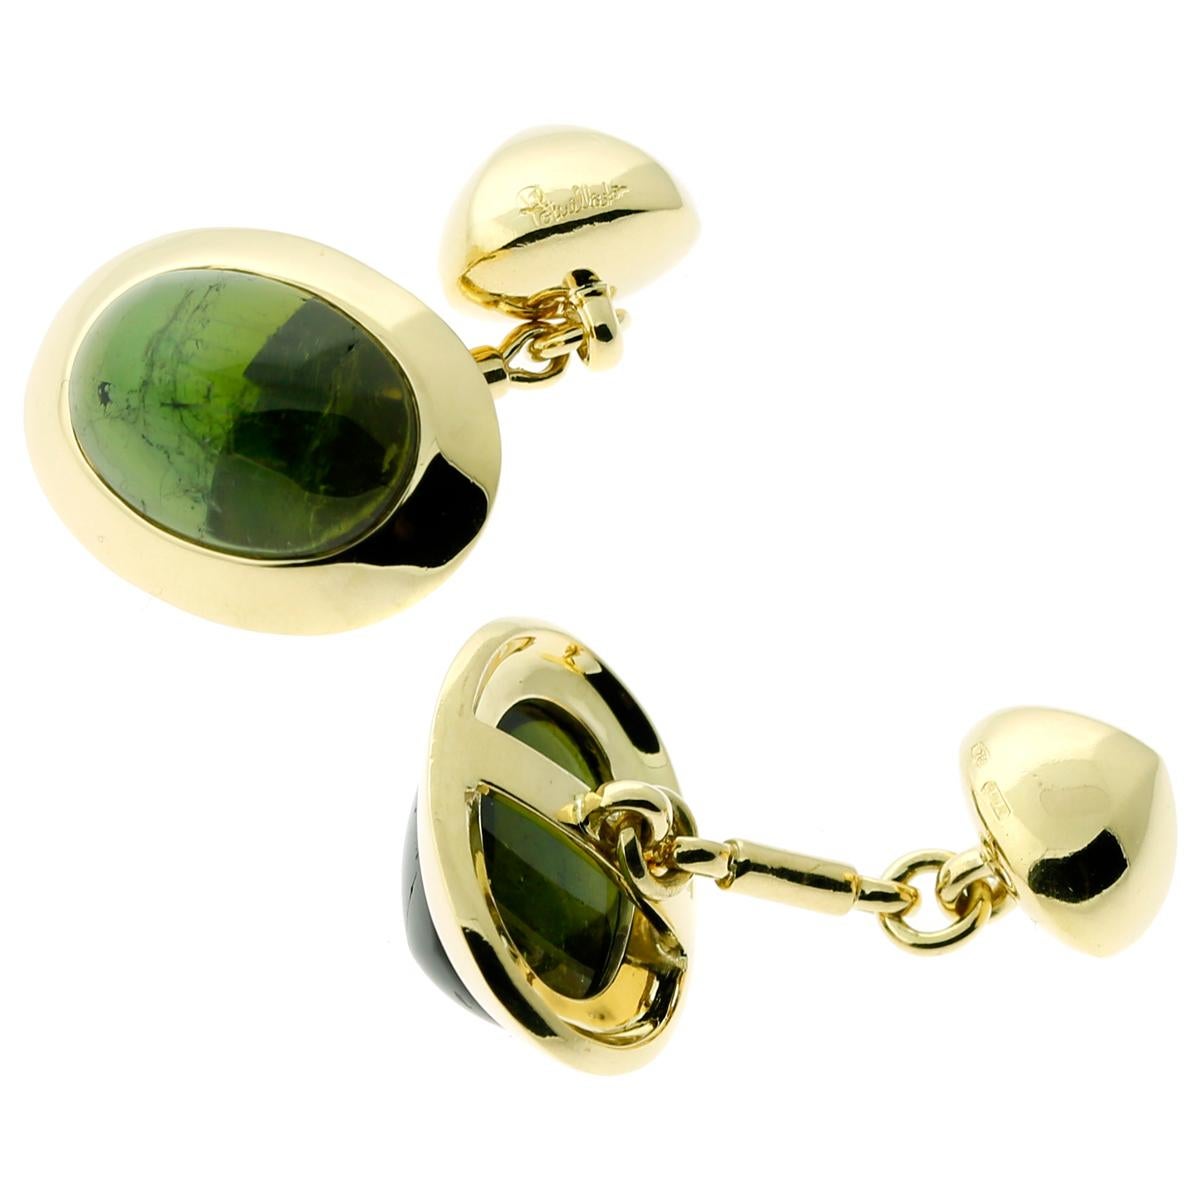 A magnificent pair of Pomellato cufflinks featuring green tourmaline in 18k yellow gold.

Retail:$3690

Inventory ID: 0000316